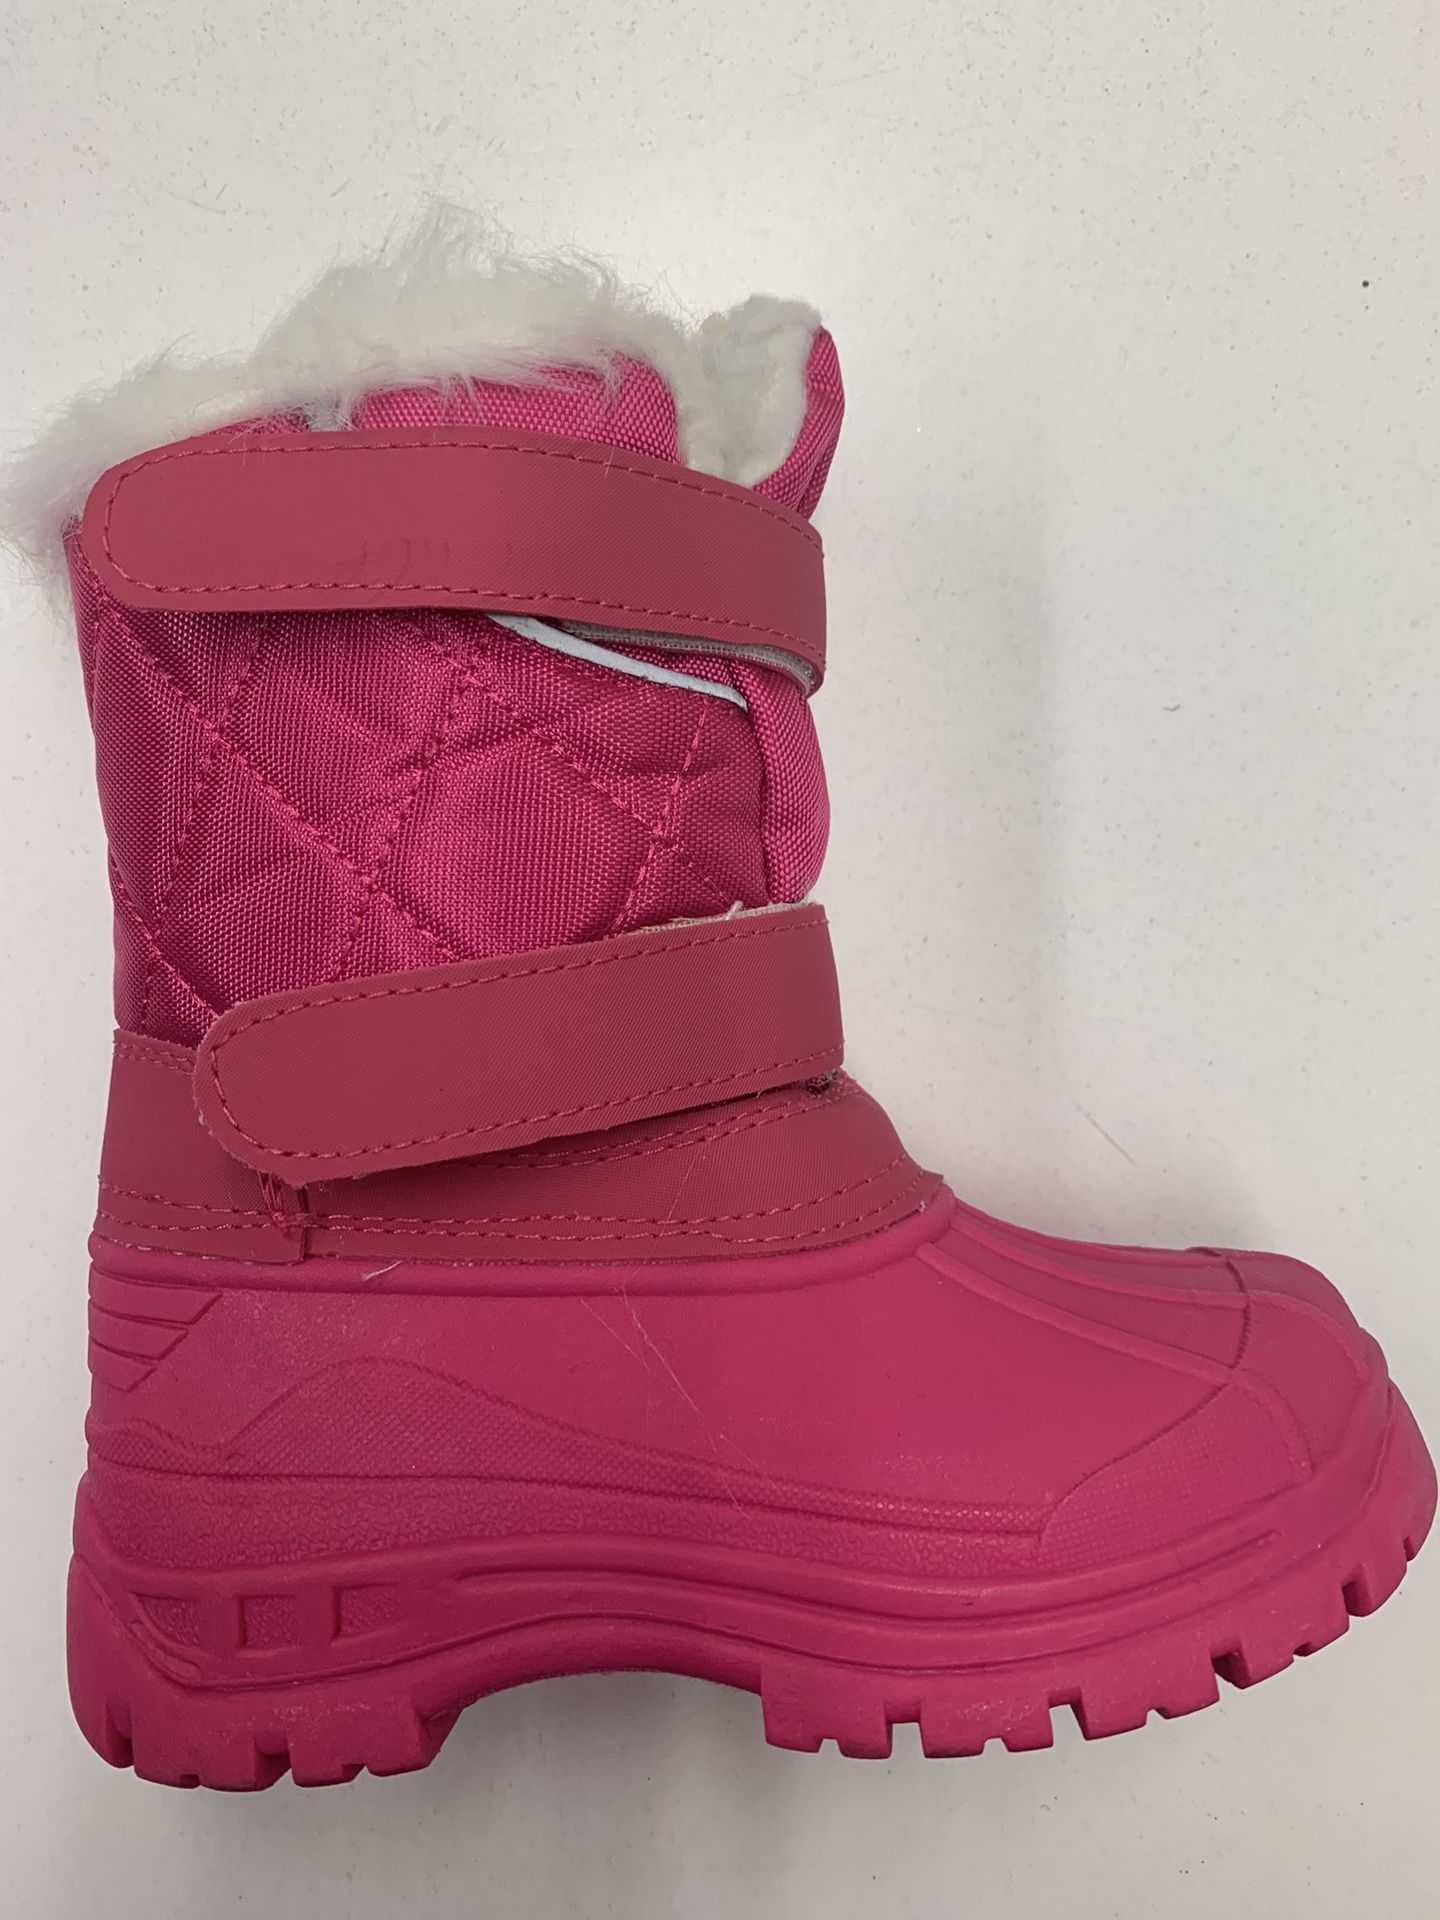 Snow boots for little girls size : 11, 12, 13, 1 toddlers sizes